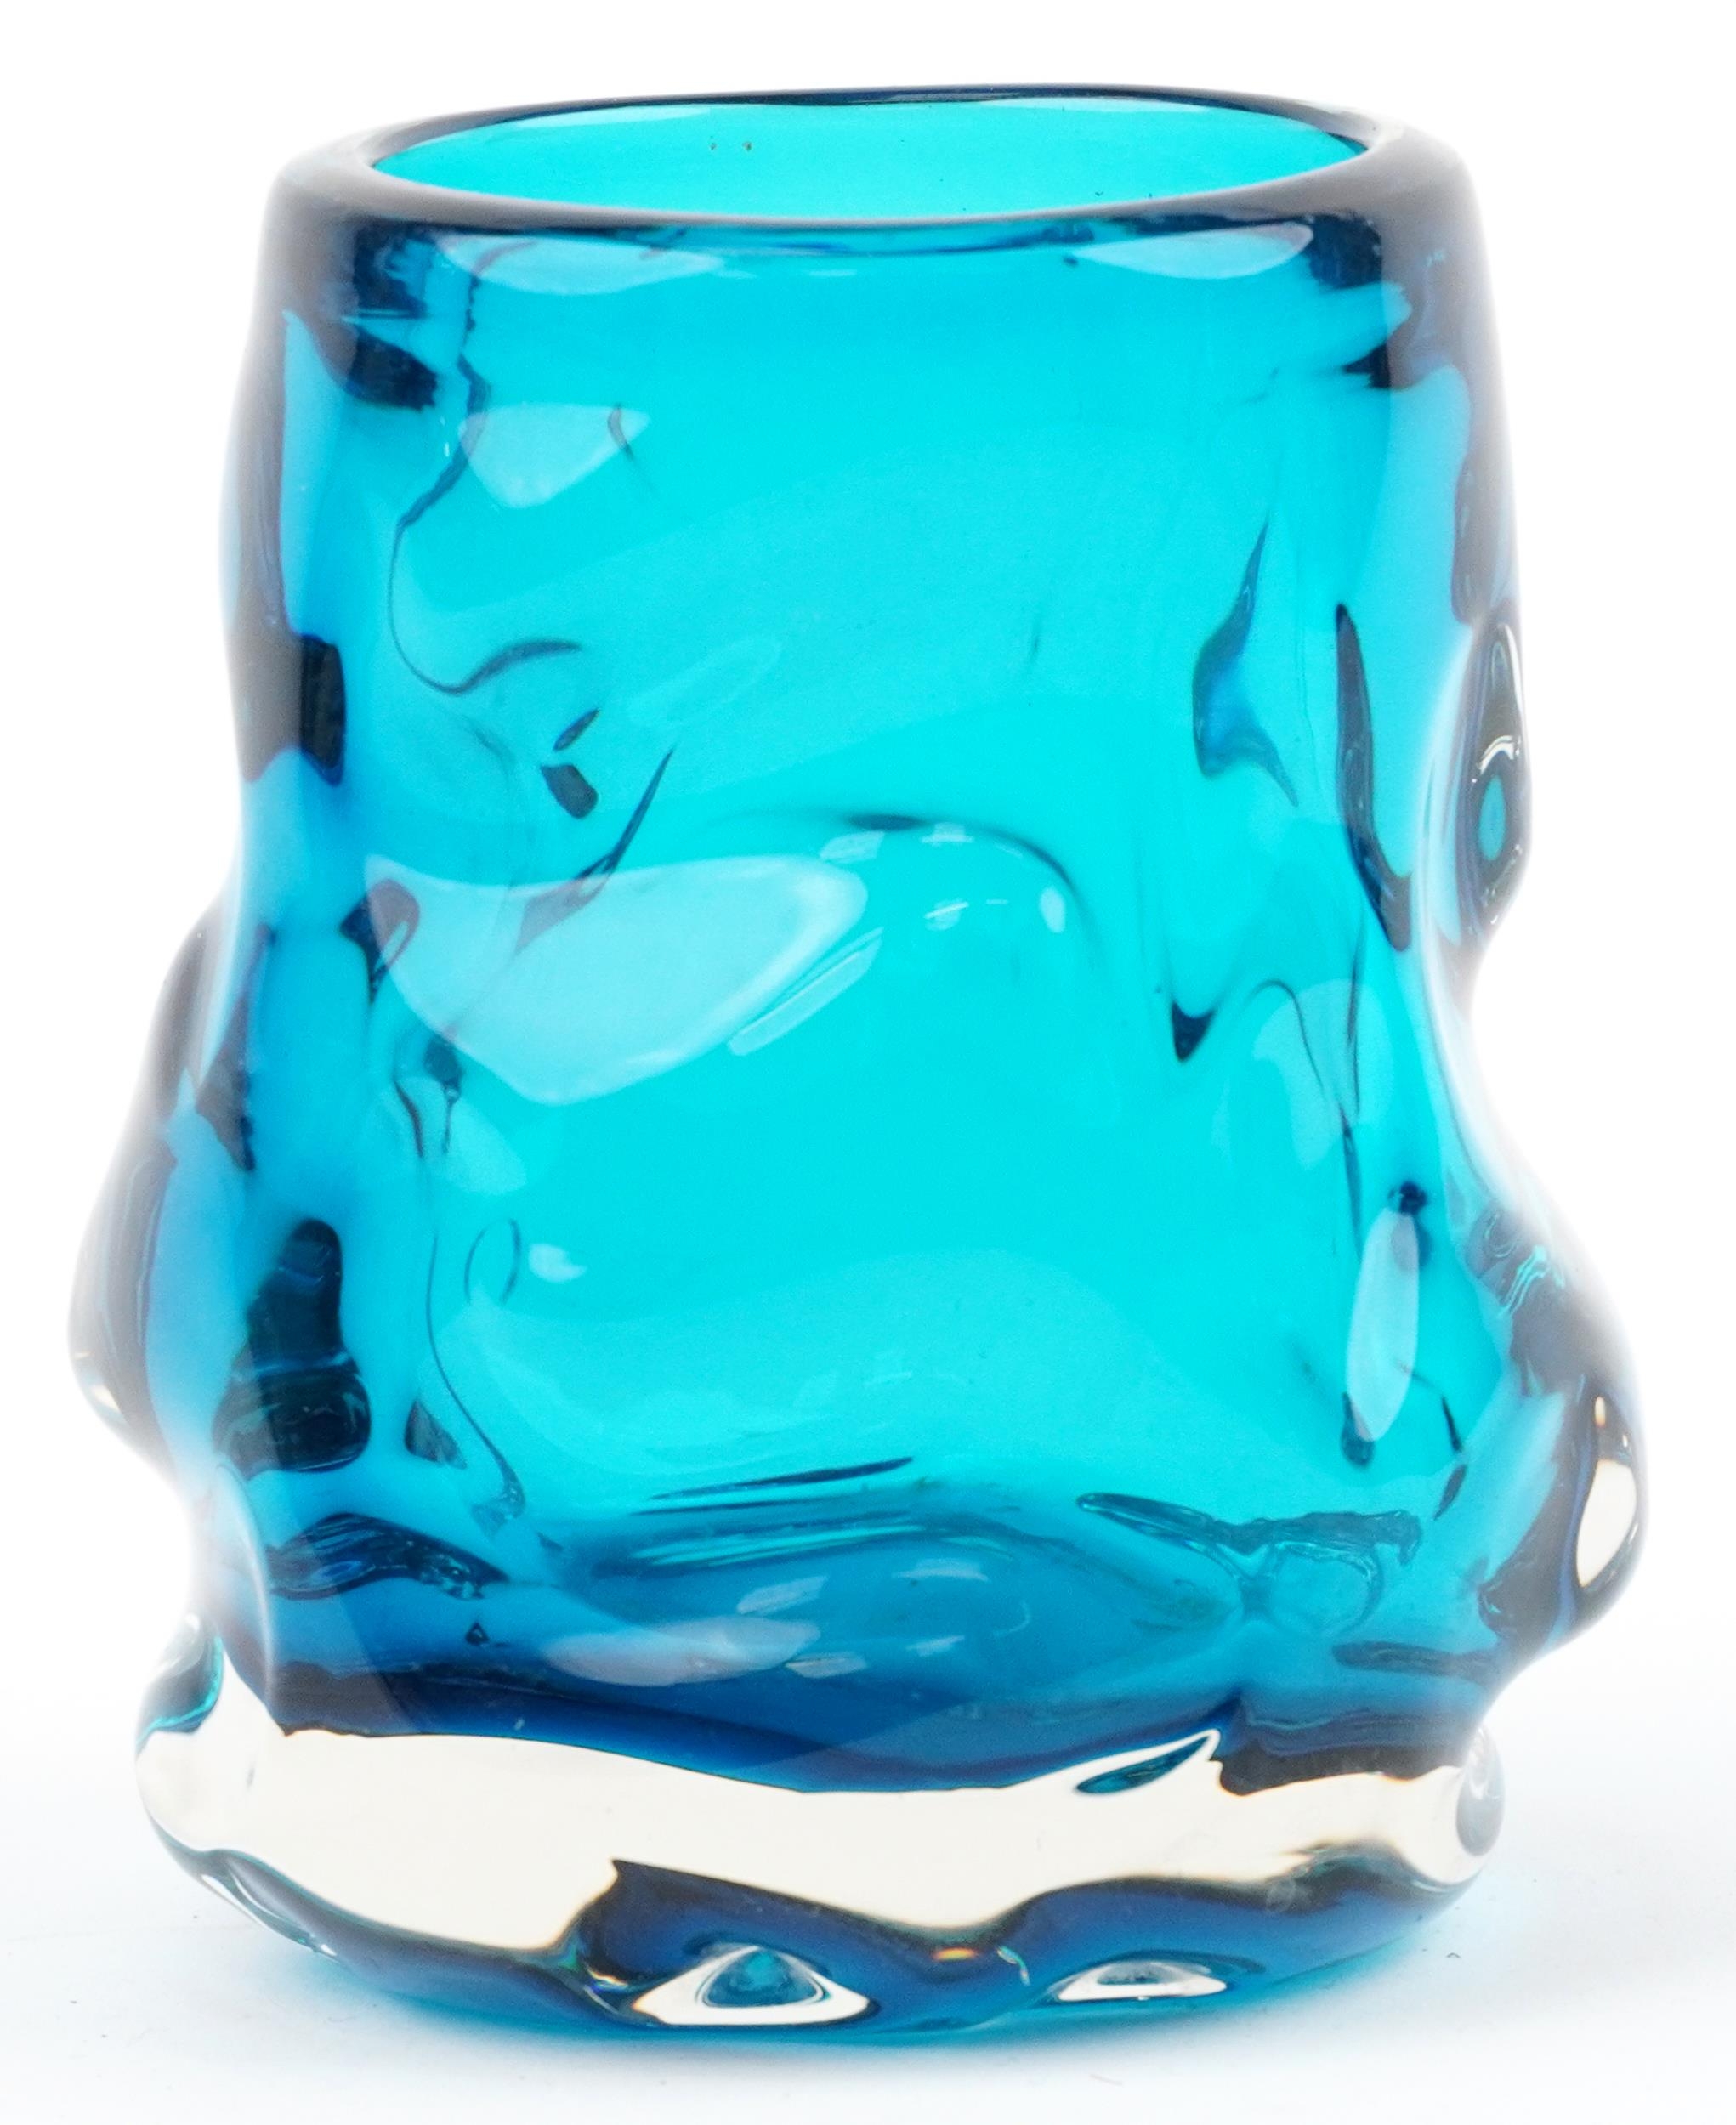 Geoffrey Baxter for Whitefriars, knobbly glass vase in kingfisher blue, 22.5cm high - Image 2 of 4